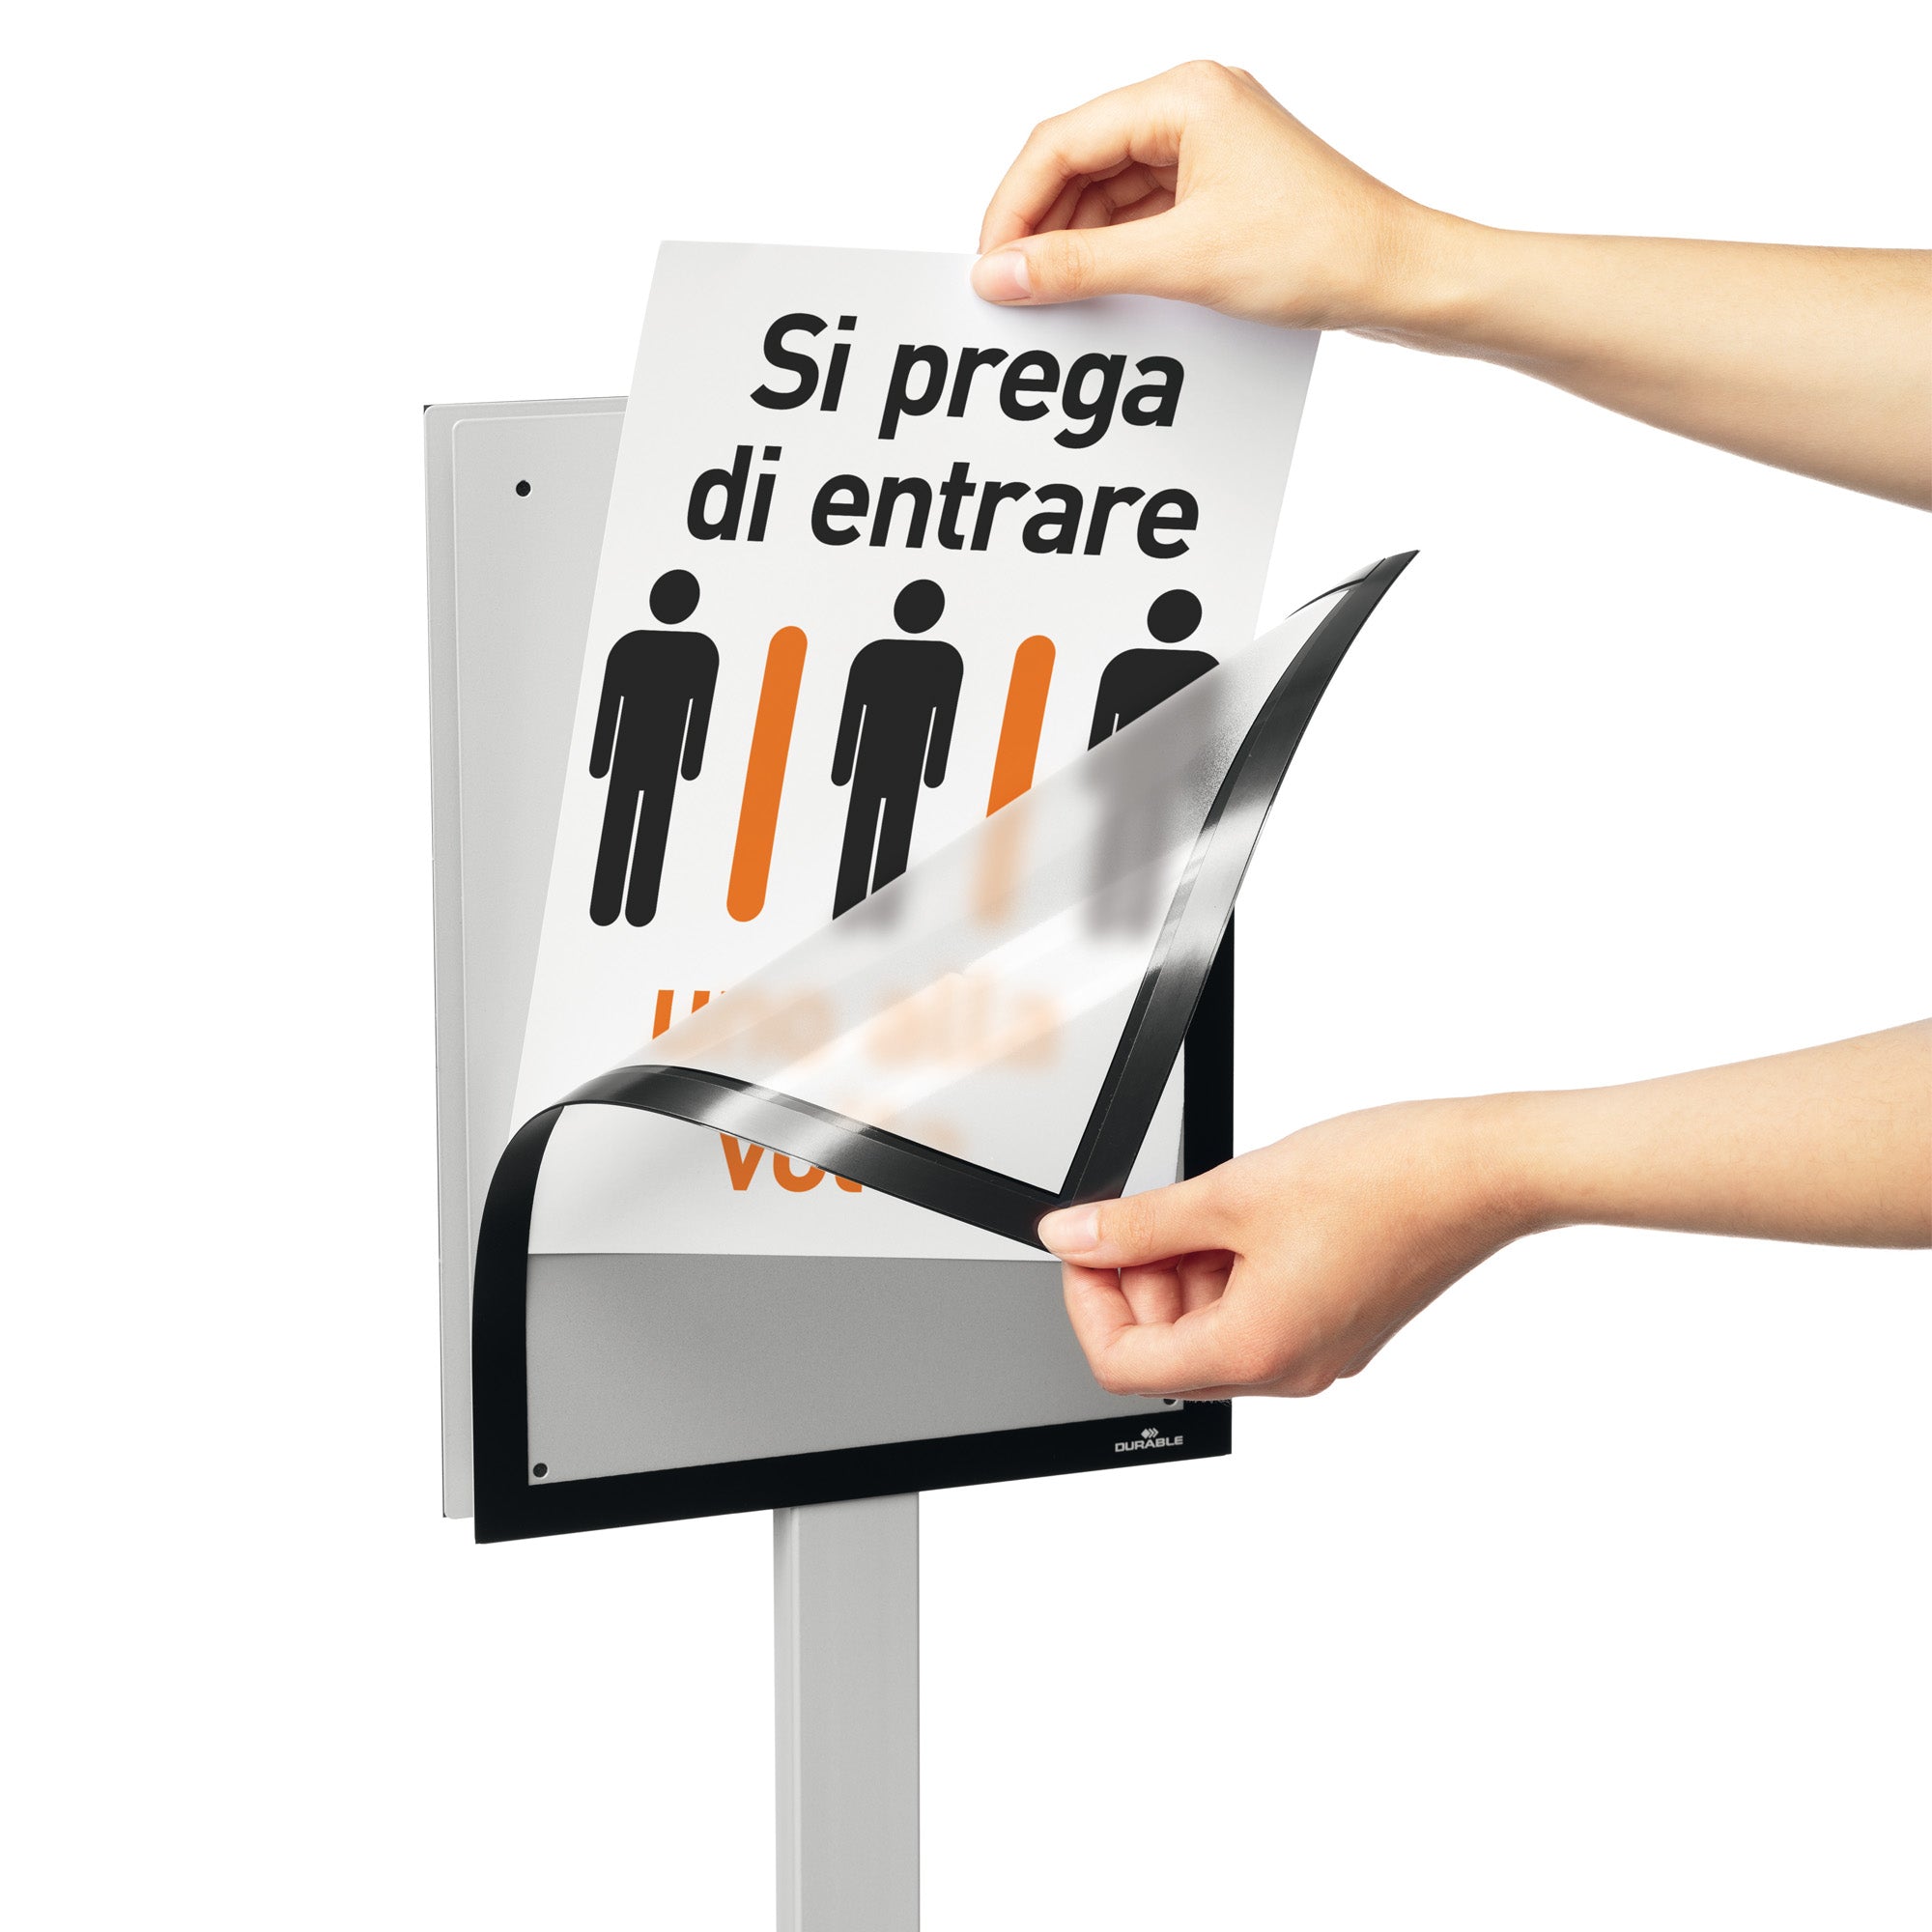 durable-espositore-pavimento-info-stand-basic-a3